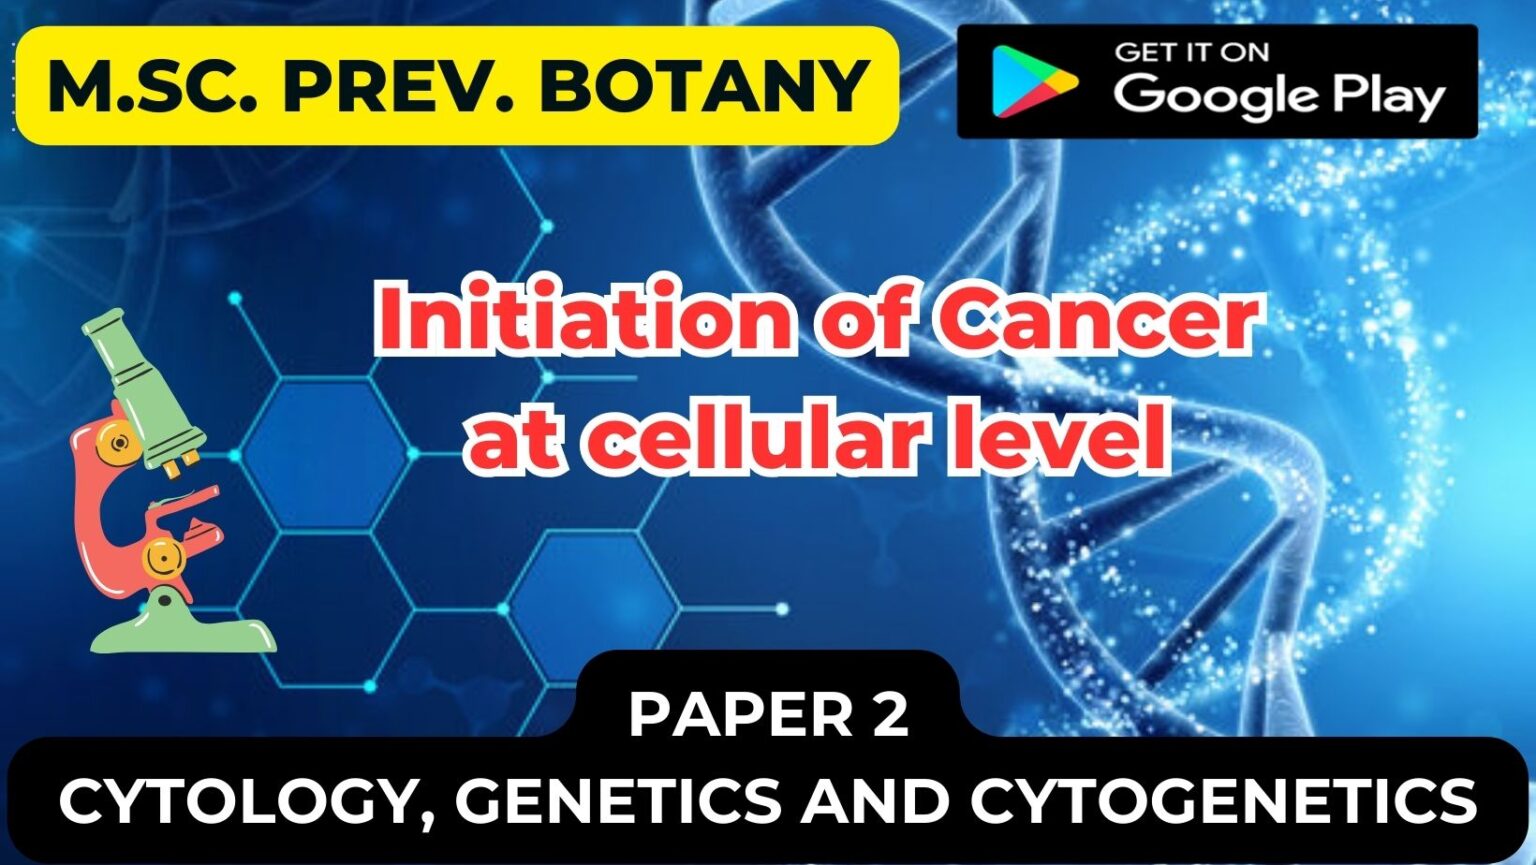 Initiation of Cancer at cellular level